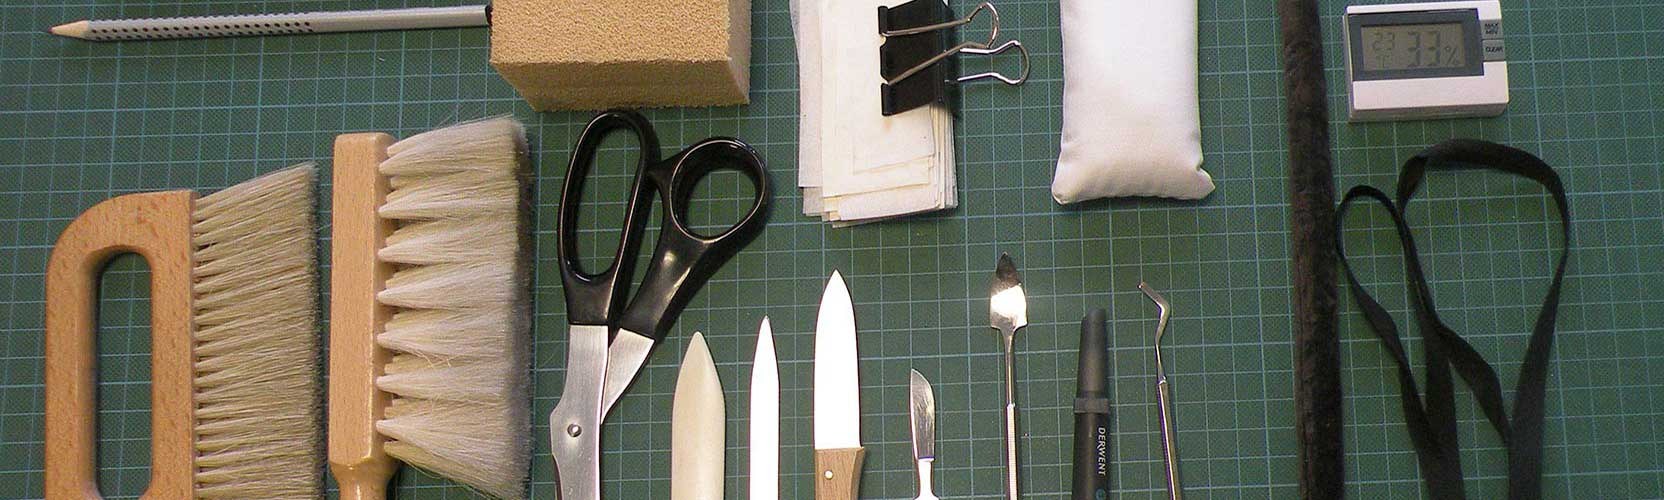 Tools used in preservation